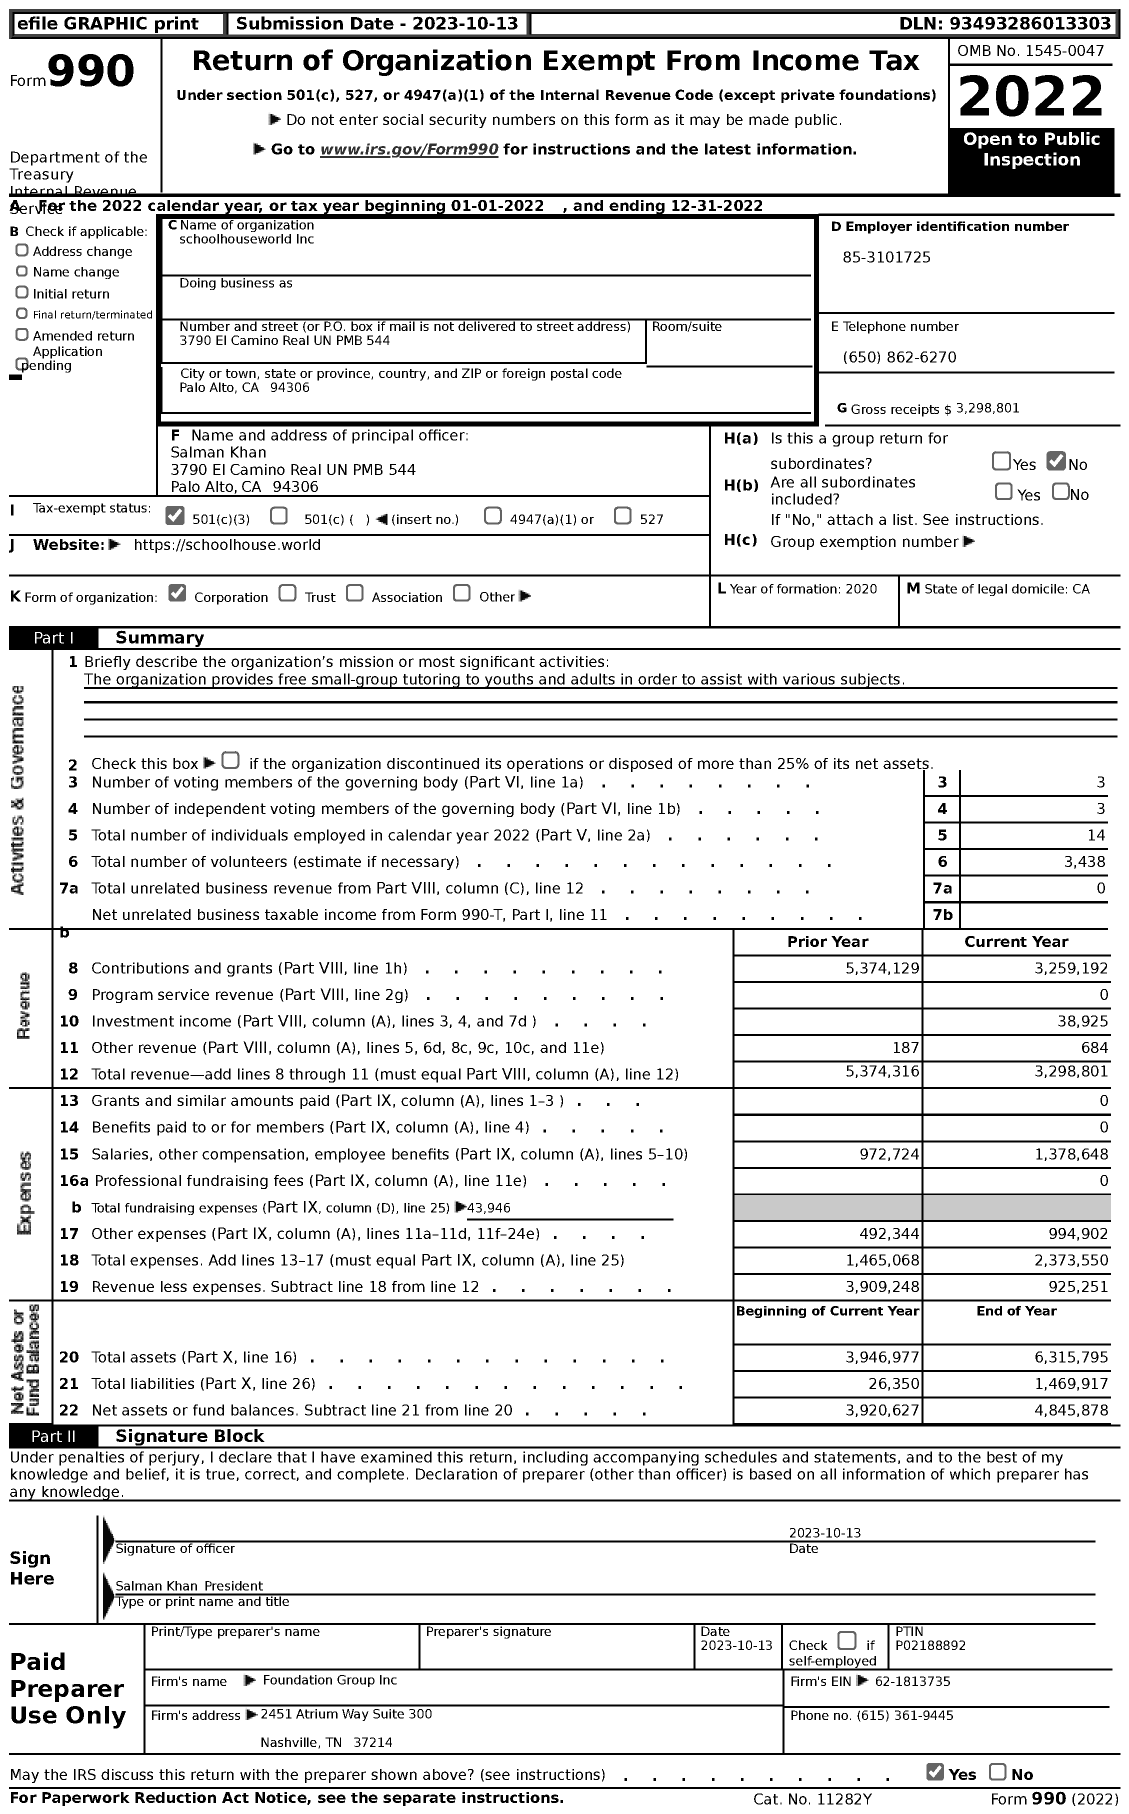 Image of first page of 2022 Form 990 for schoolhouseworld